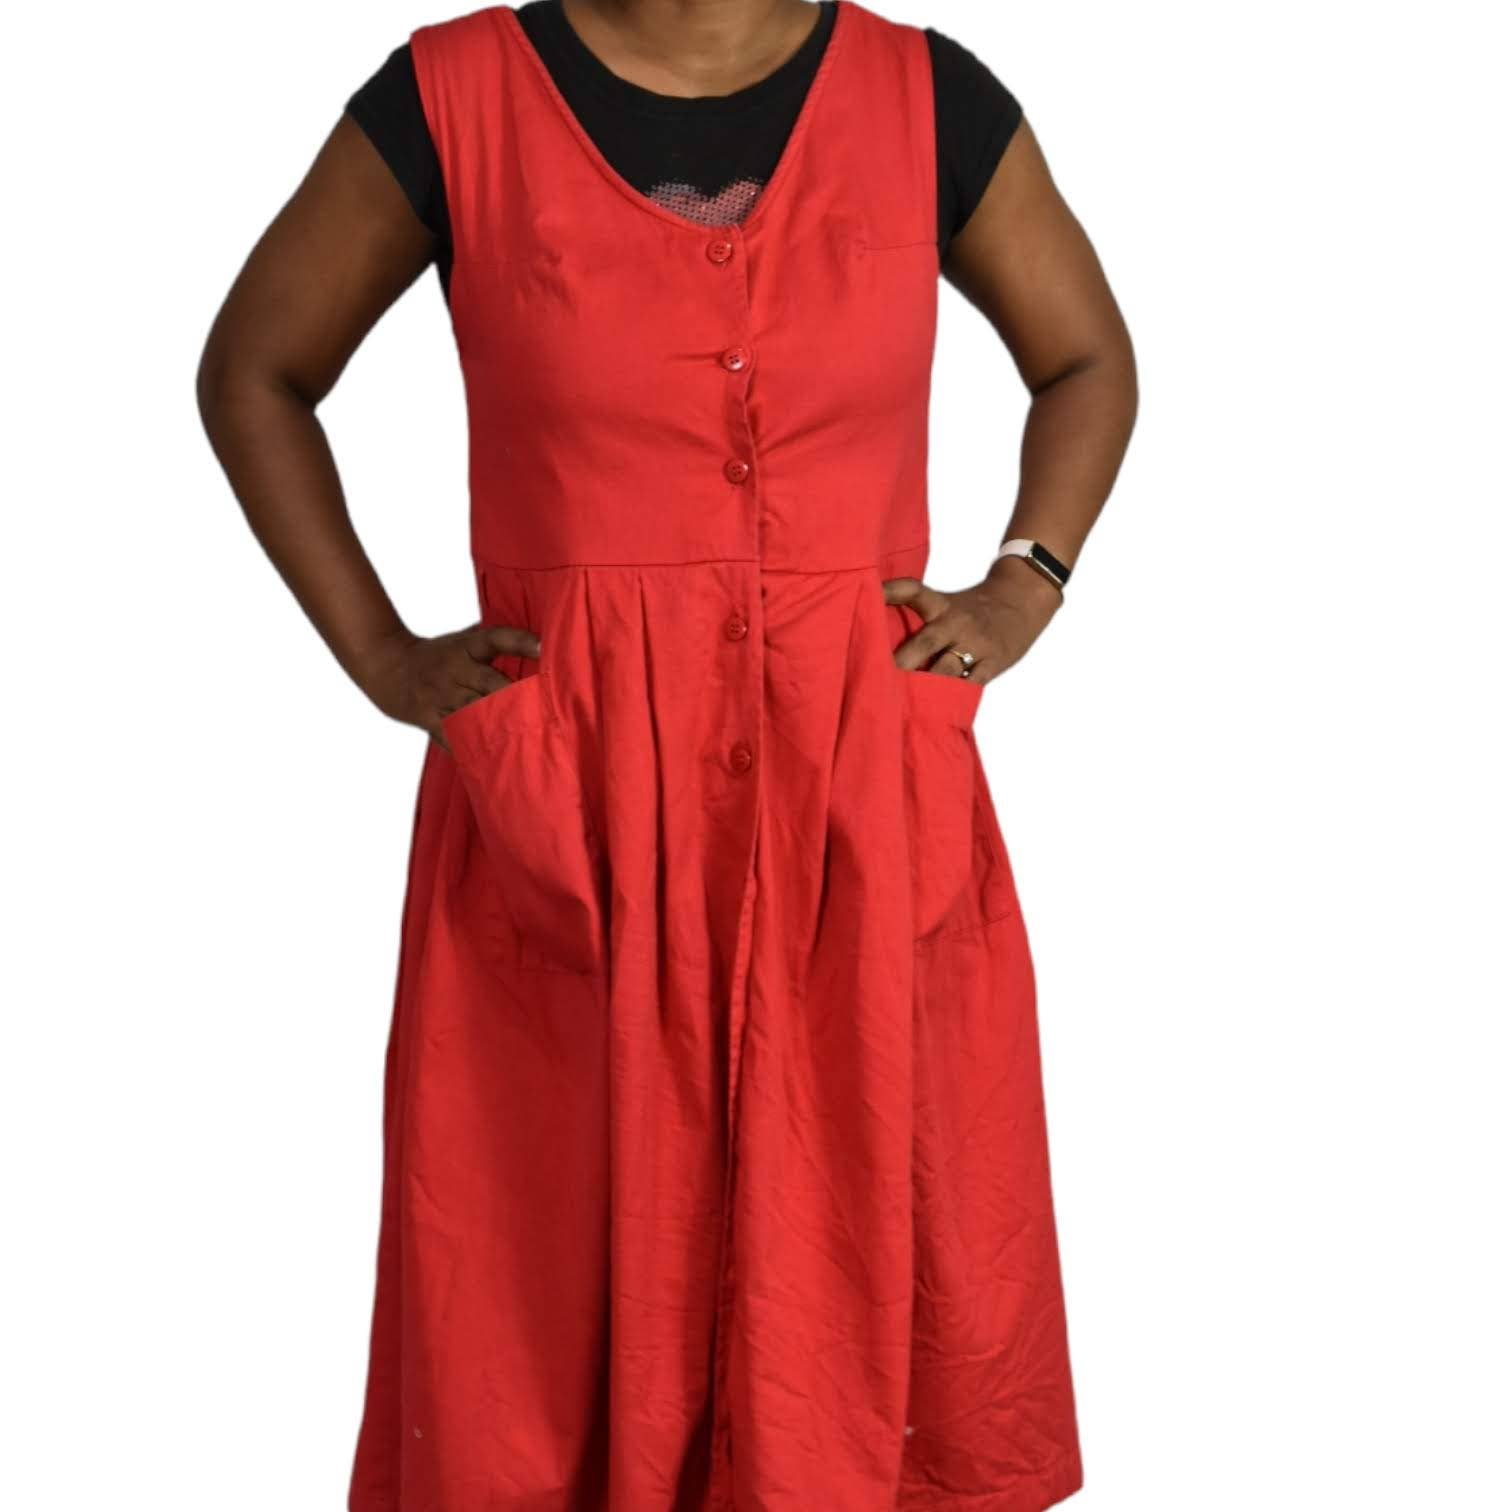 Homemade Jumper Dress Vintage Red Button Front Pinafore Midi Pockets Size Small